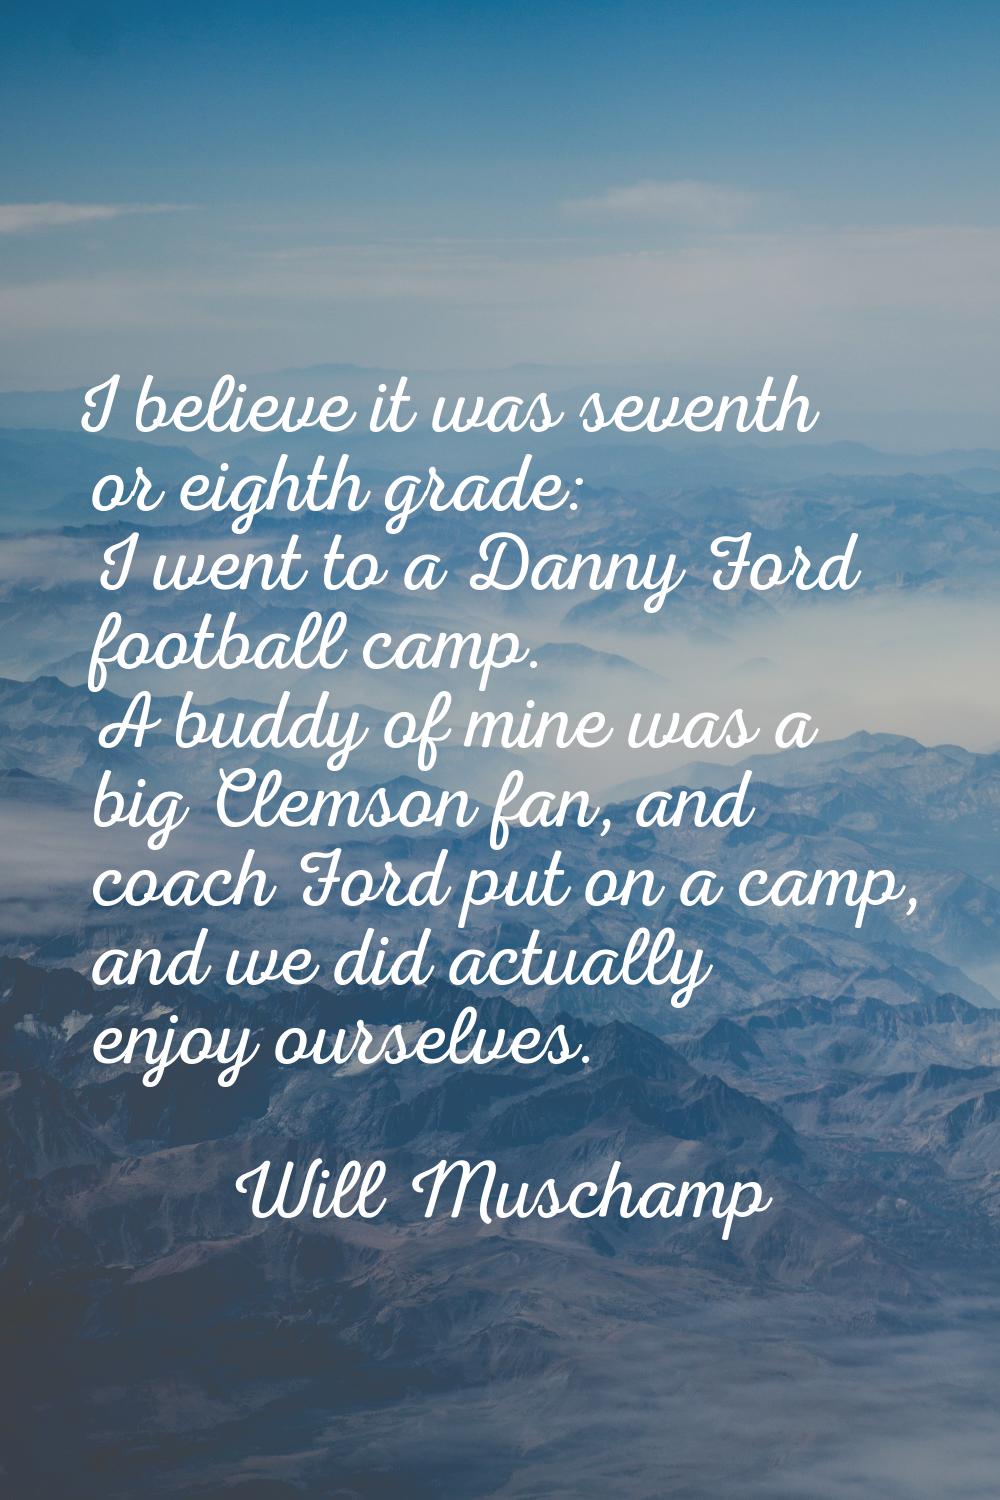 I believe it was seventh or eighth grade: I went to a Danny Ford football camp. A buddy of mine was